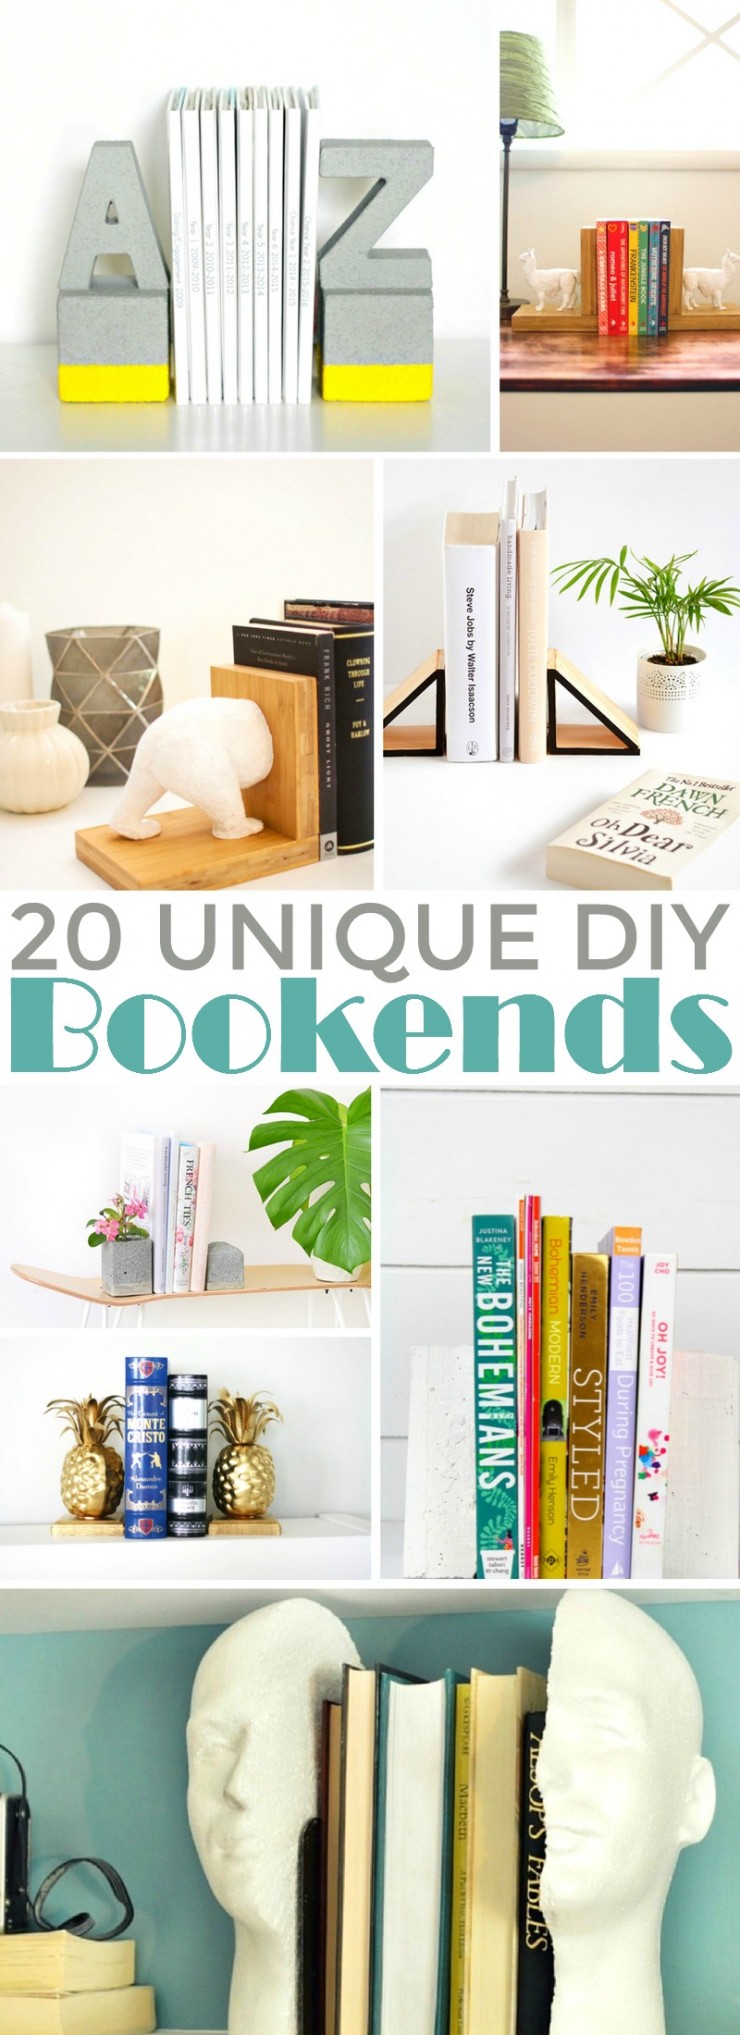 I’d like to share with you my favourite ideas for DIY bookends that will keep your books upright and will make a great impact on the look and feel of your bookshelves.